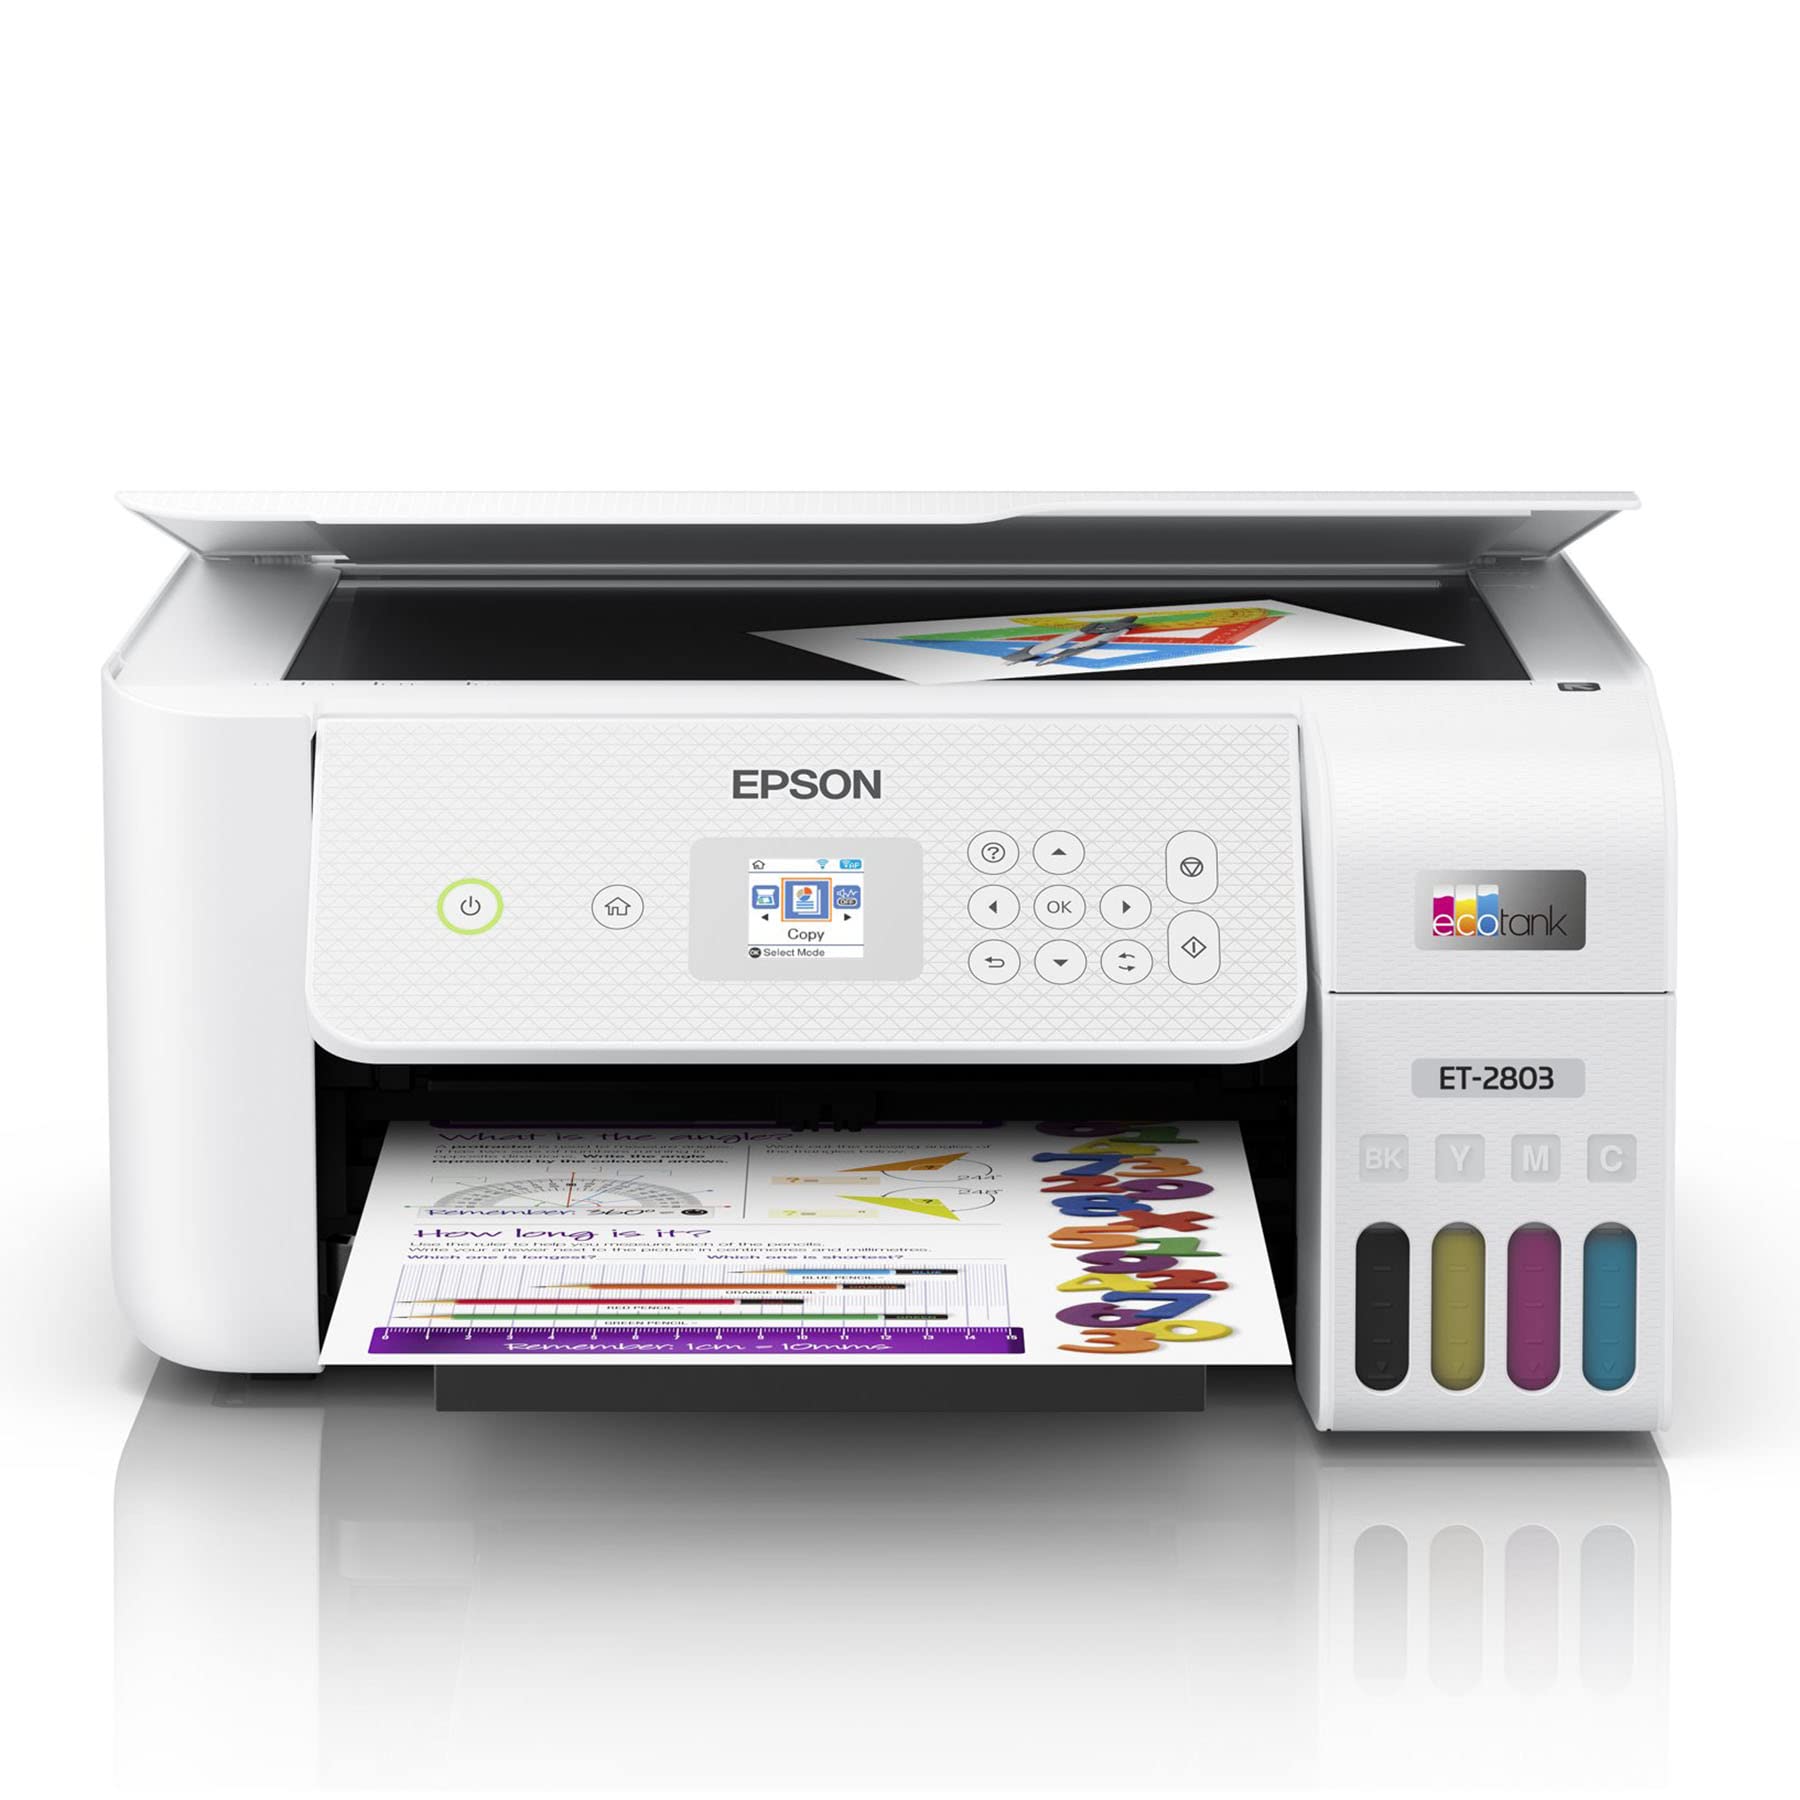 Epson EcoTank 2803 Series All-in-One Color Inkjet Cartridge-Free Supertank Printer I Print Copy Scan I Wireless I Mobile & Voice-Activated Printing I Print Up to 10 ISO PPM I 1.44" Color LCD